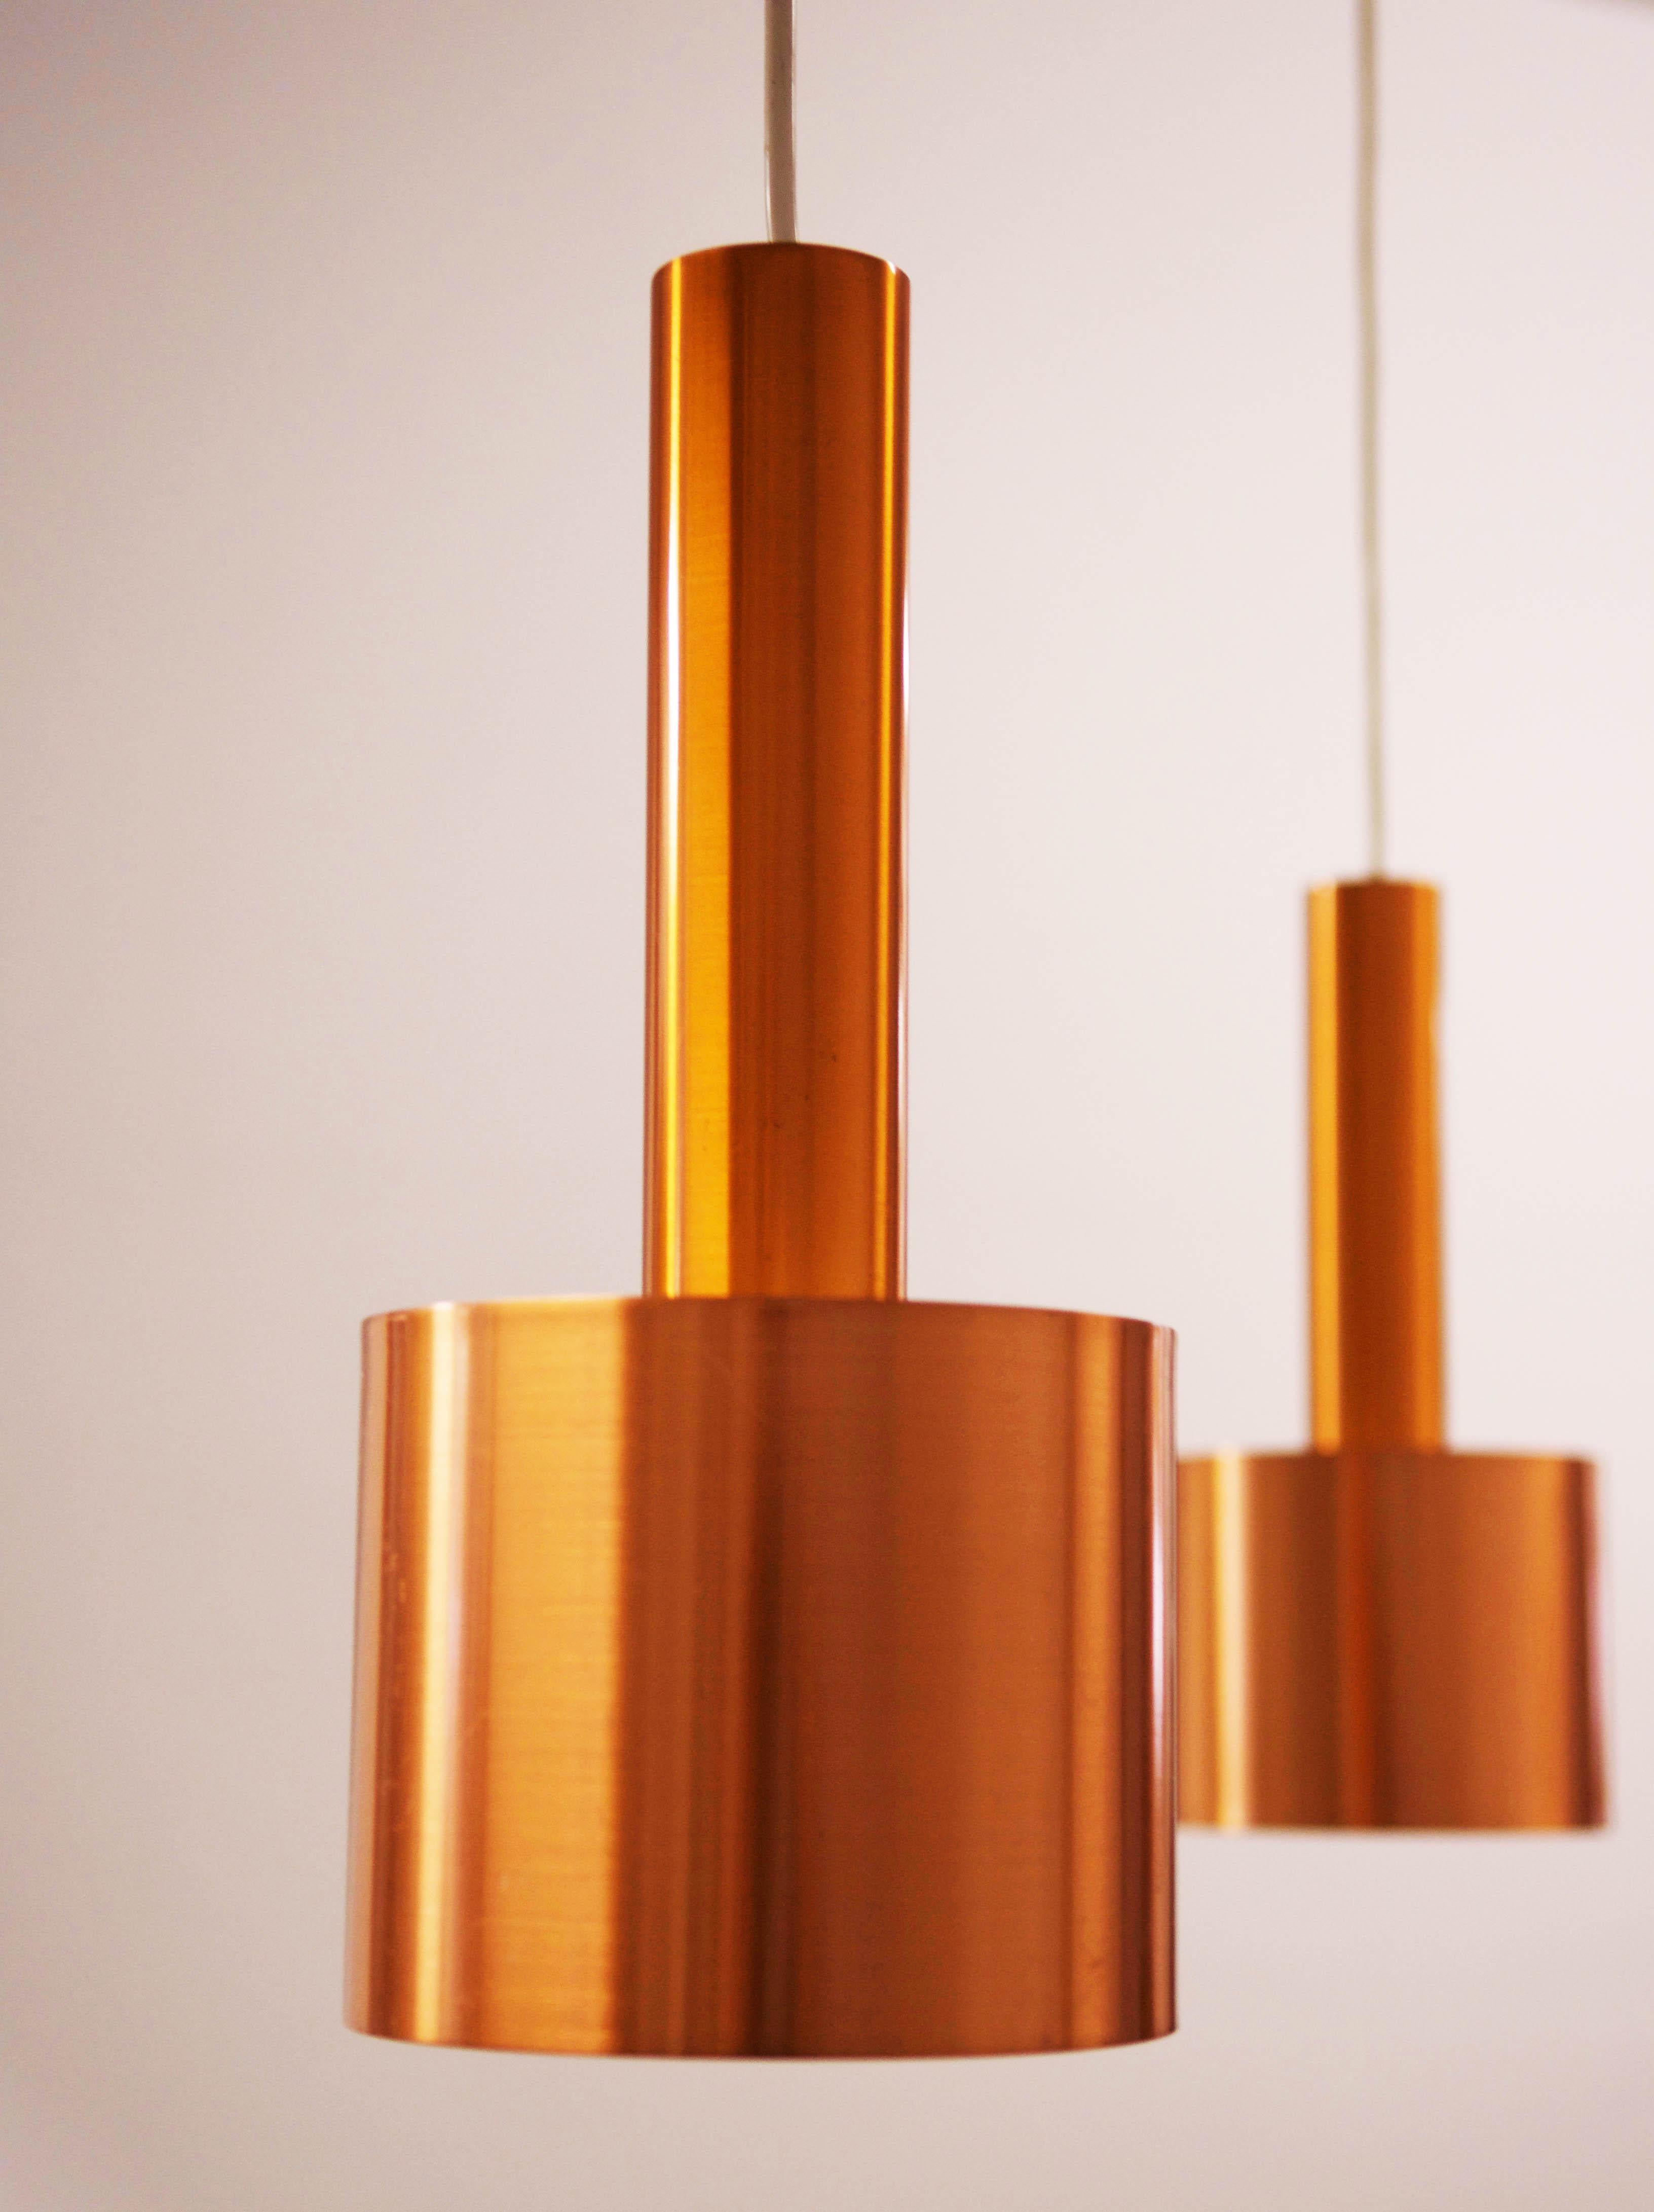 Copper pendant bell form fitted with one E27 socket. Made by Lyfa in Denmark in the 1960s.